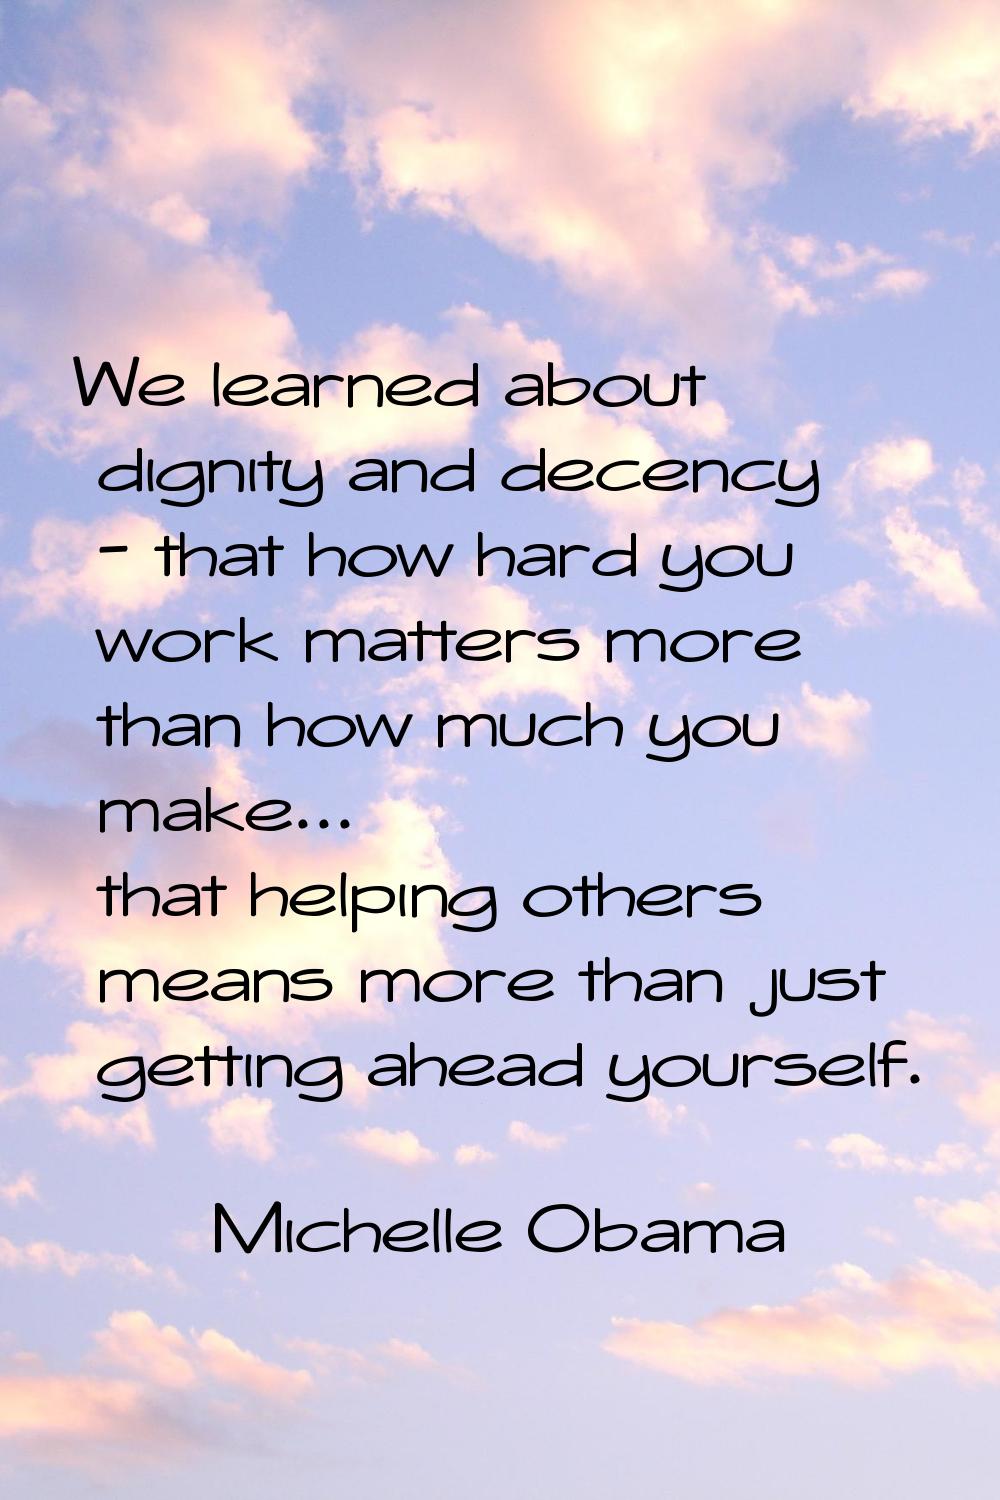 We learned about dignity and decency - that how hard you work matters more than how much you make..